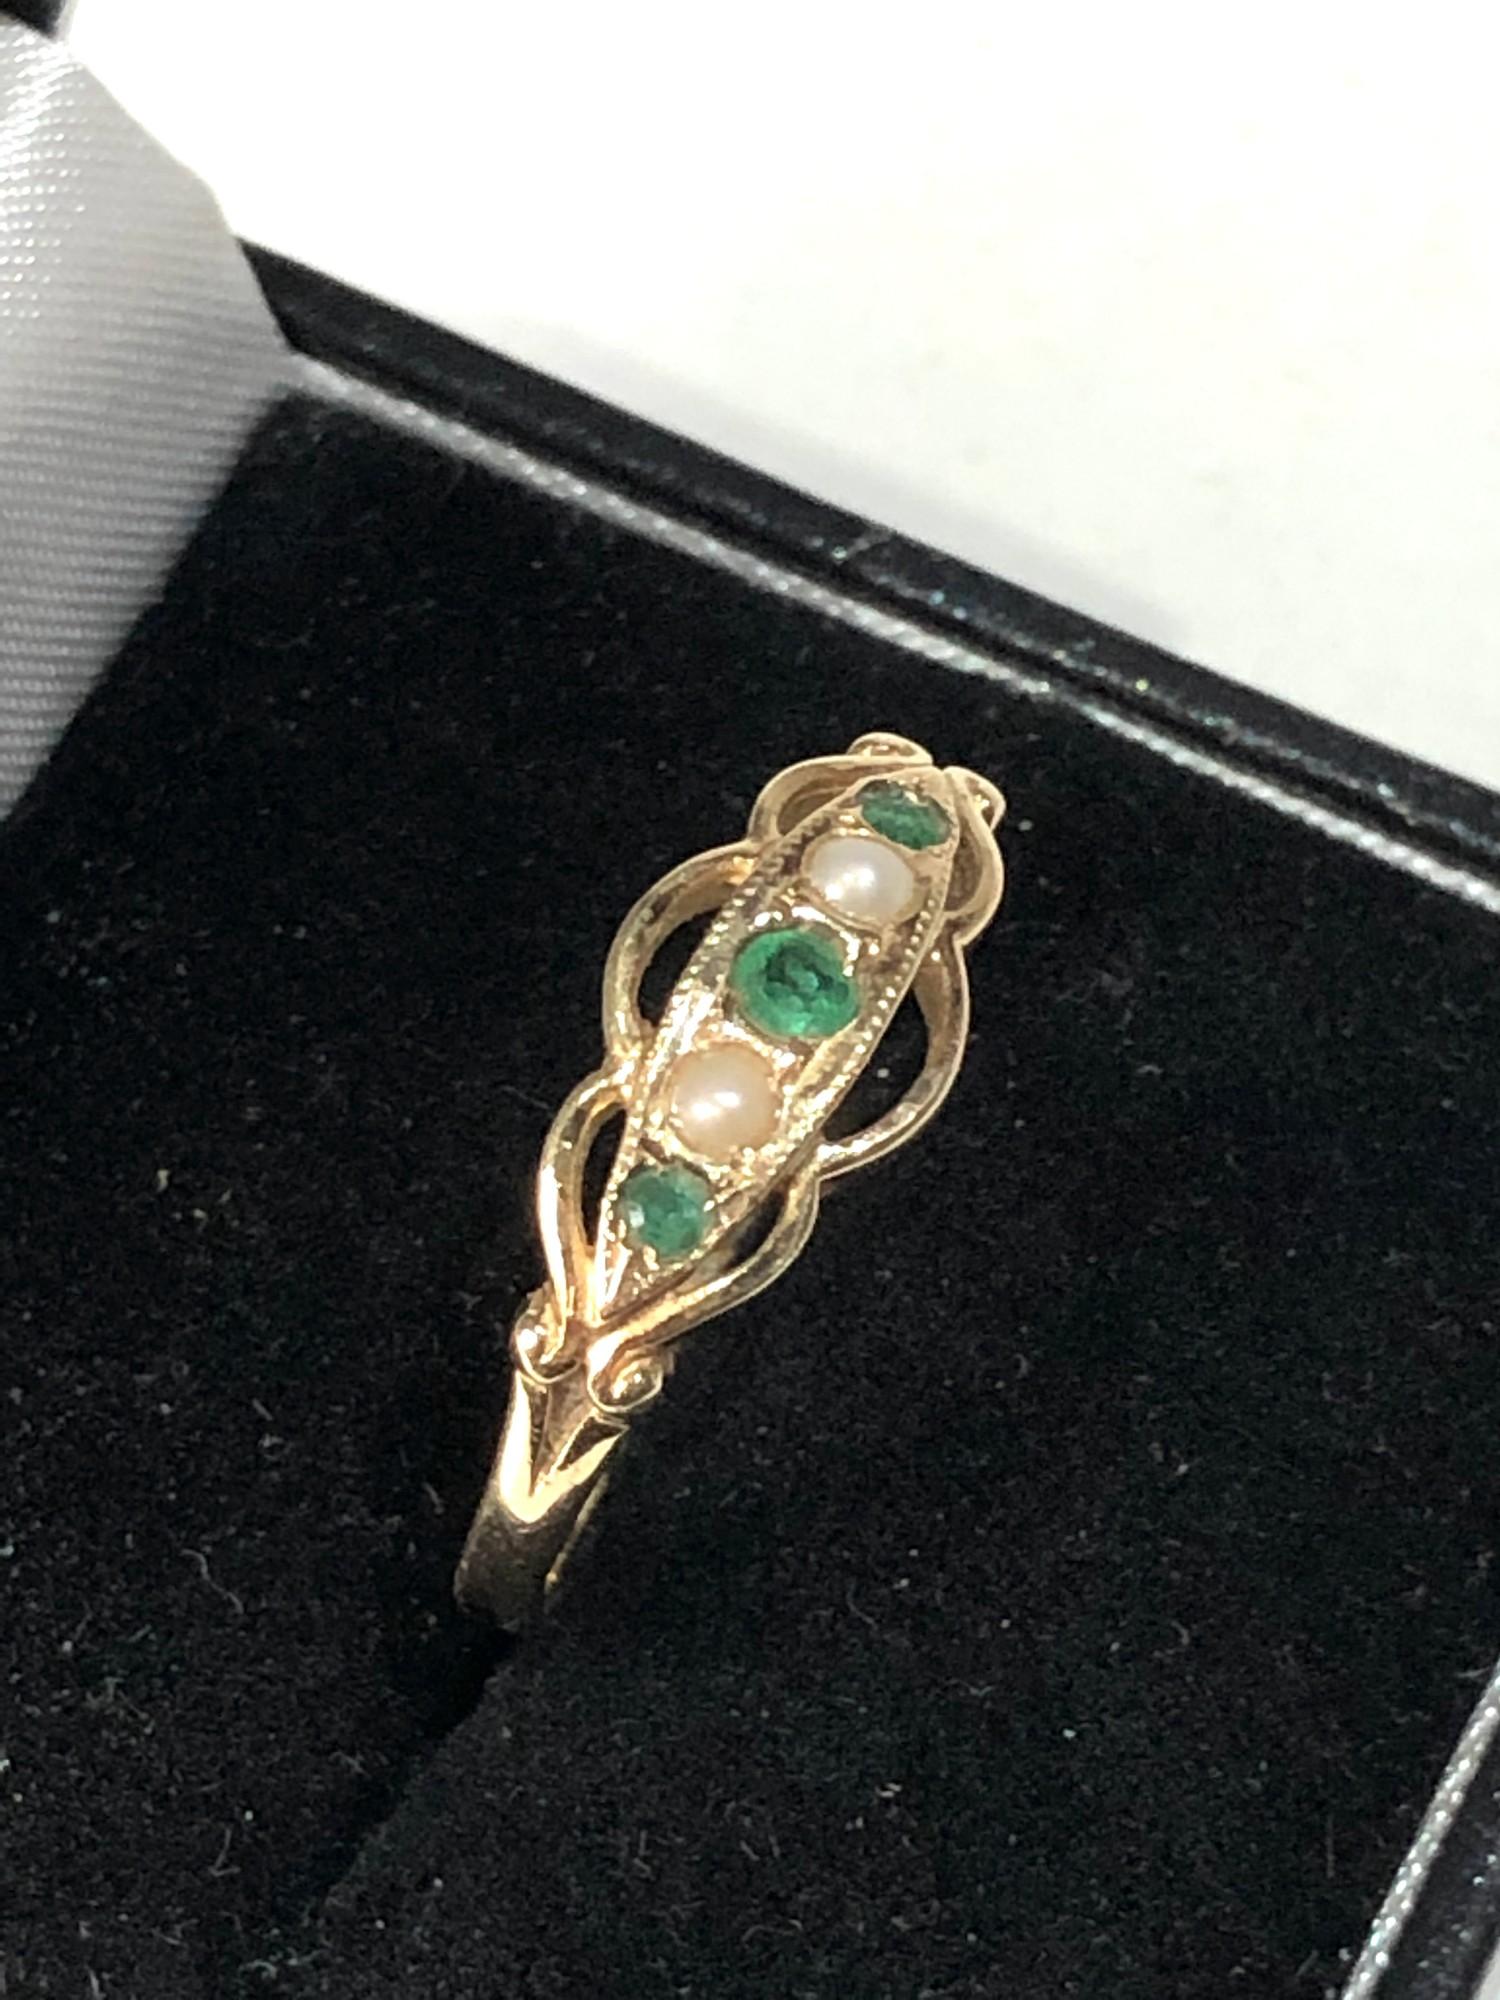 9ct gold Emerald and pearl gypsy ring weight 2g - Image 2 of 3